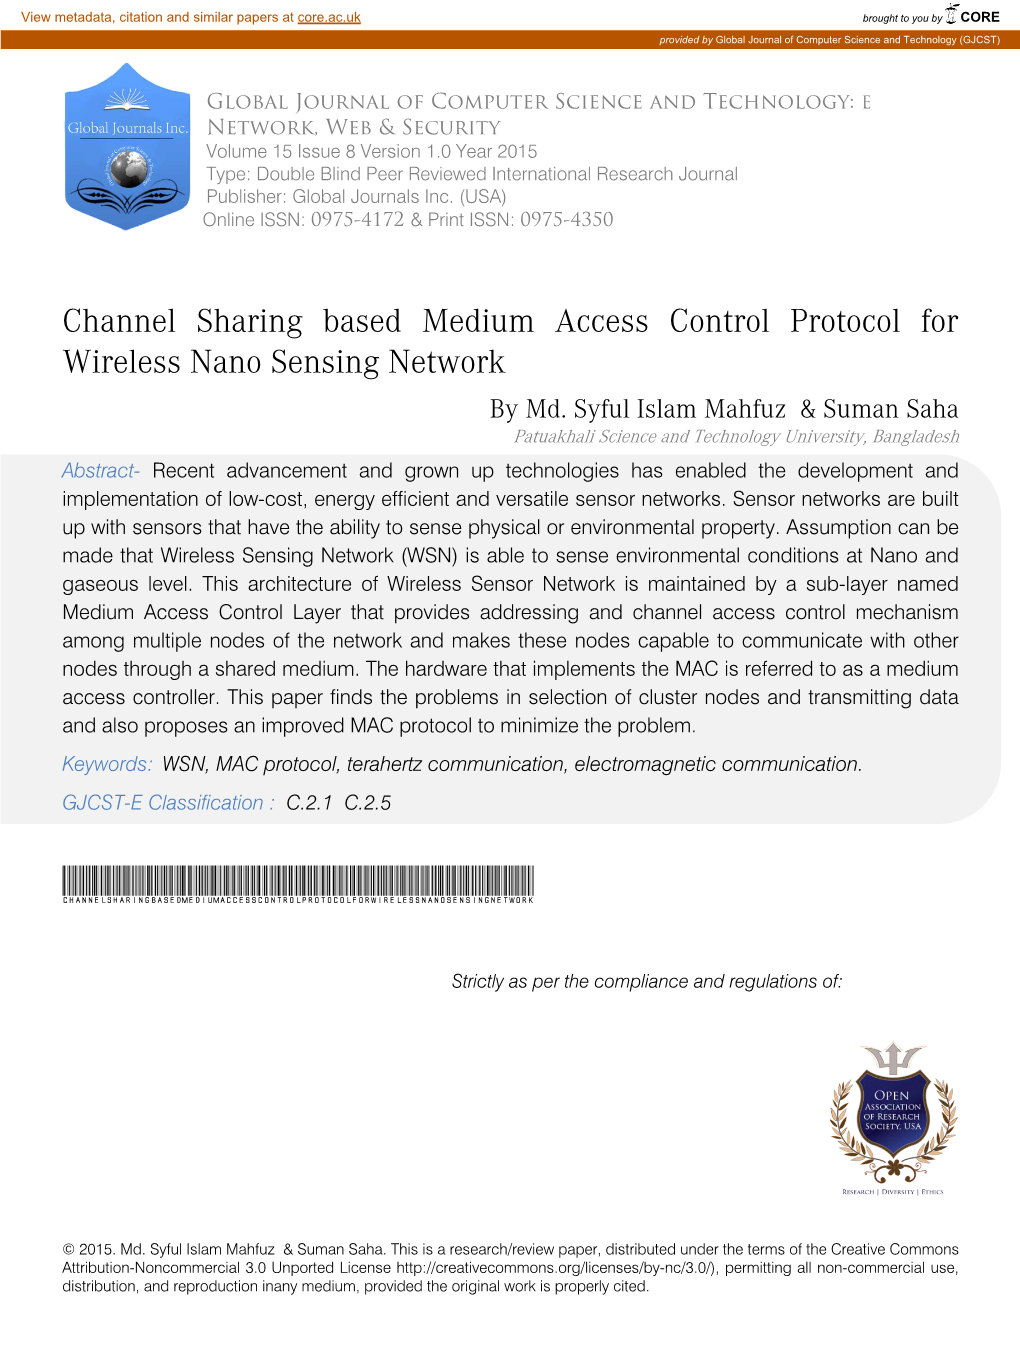 Channel Sharing Based Medium Access Control Protocol for Wireless Nano Sensing Network